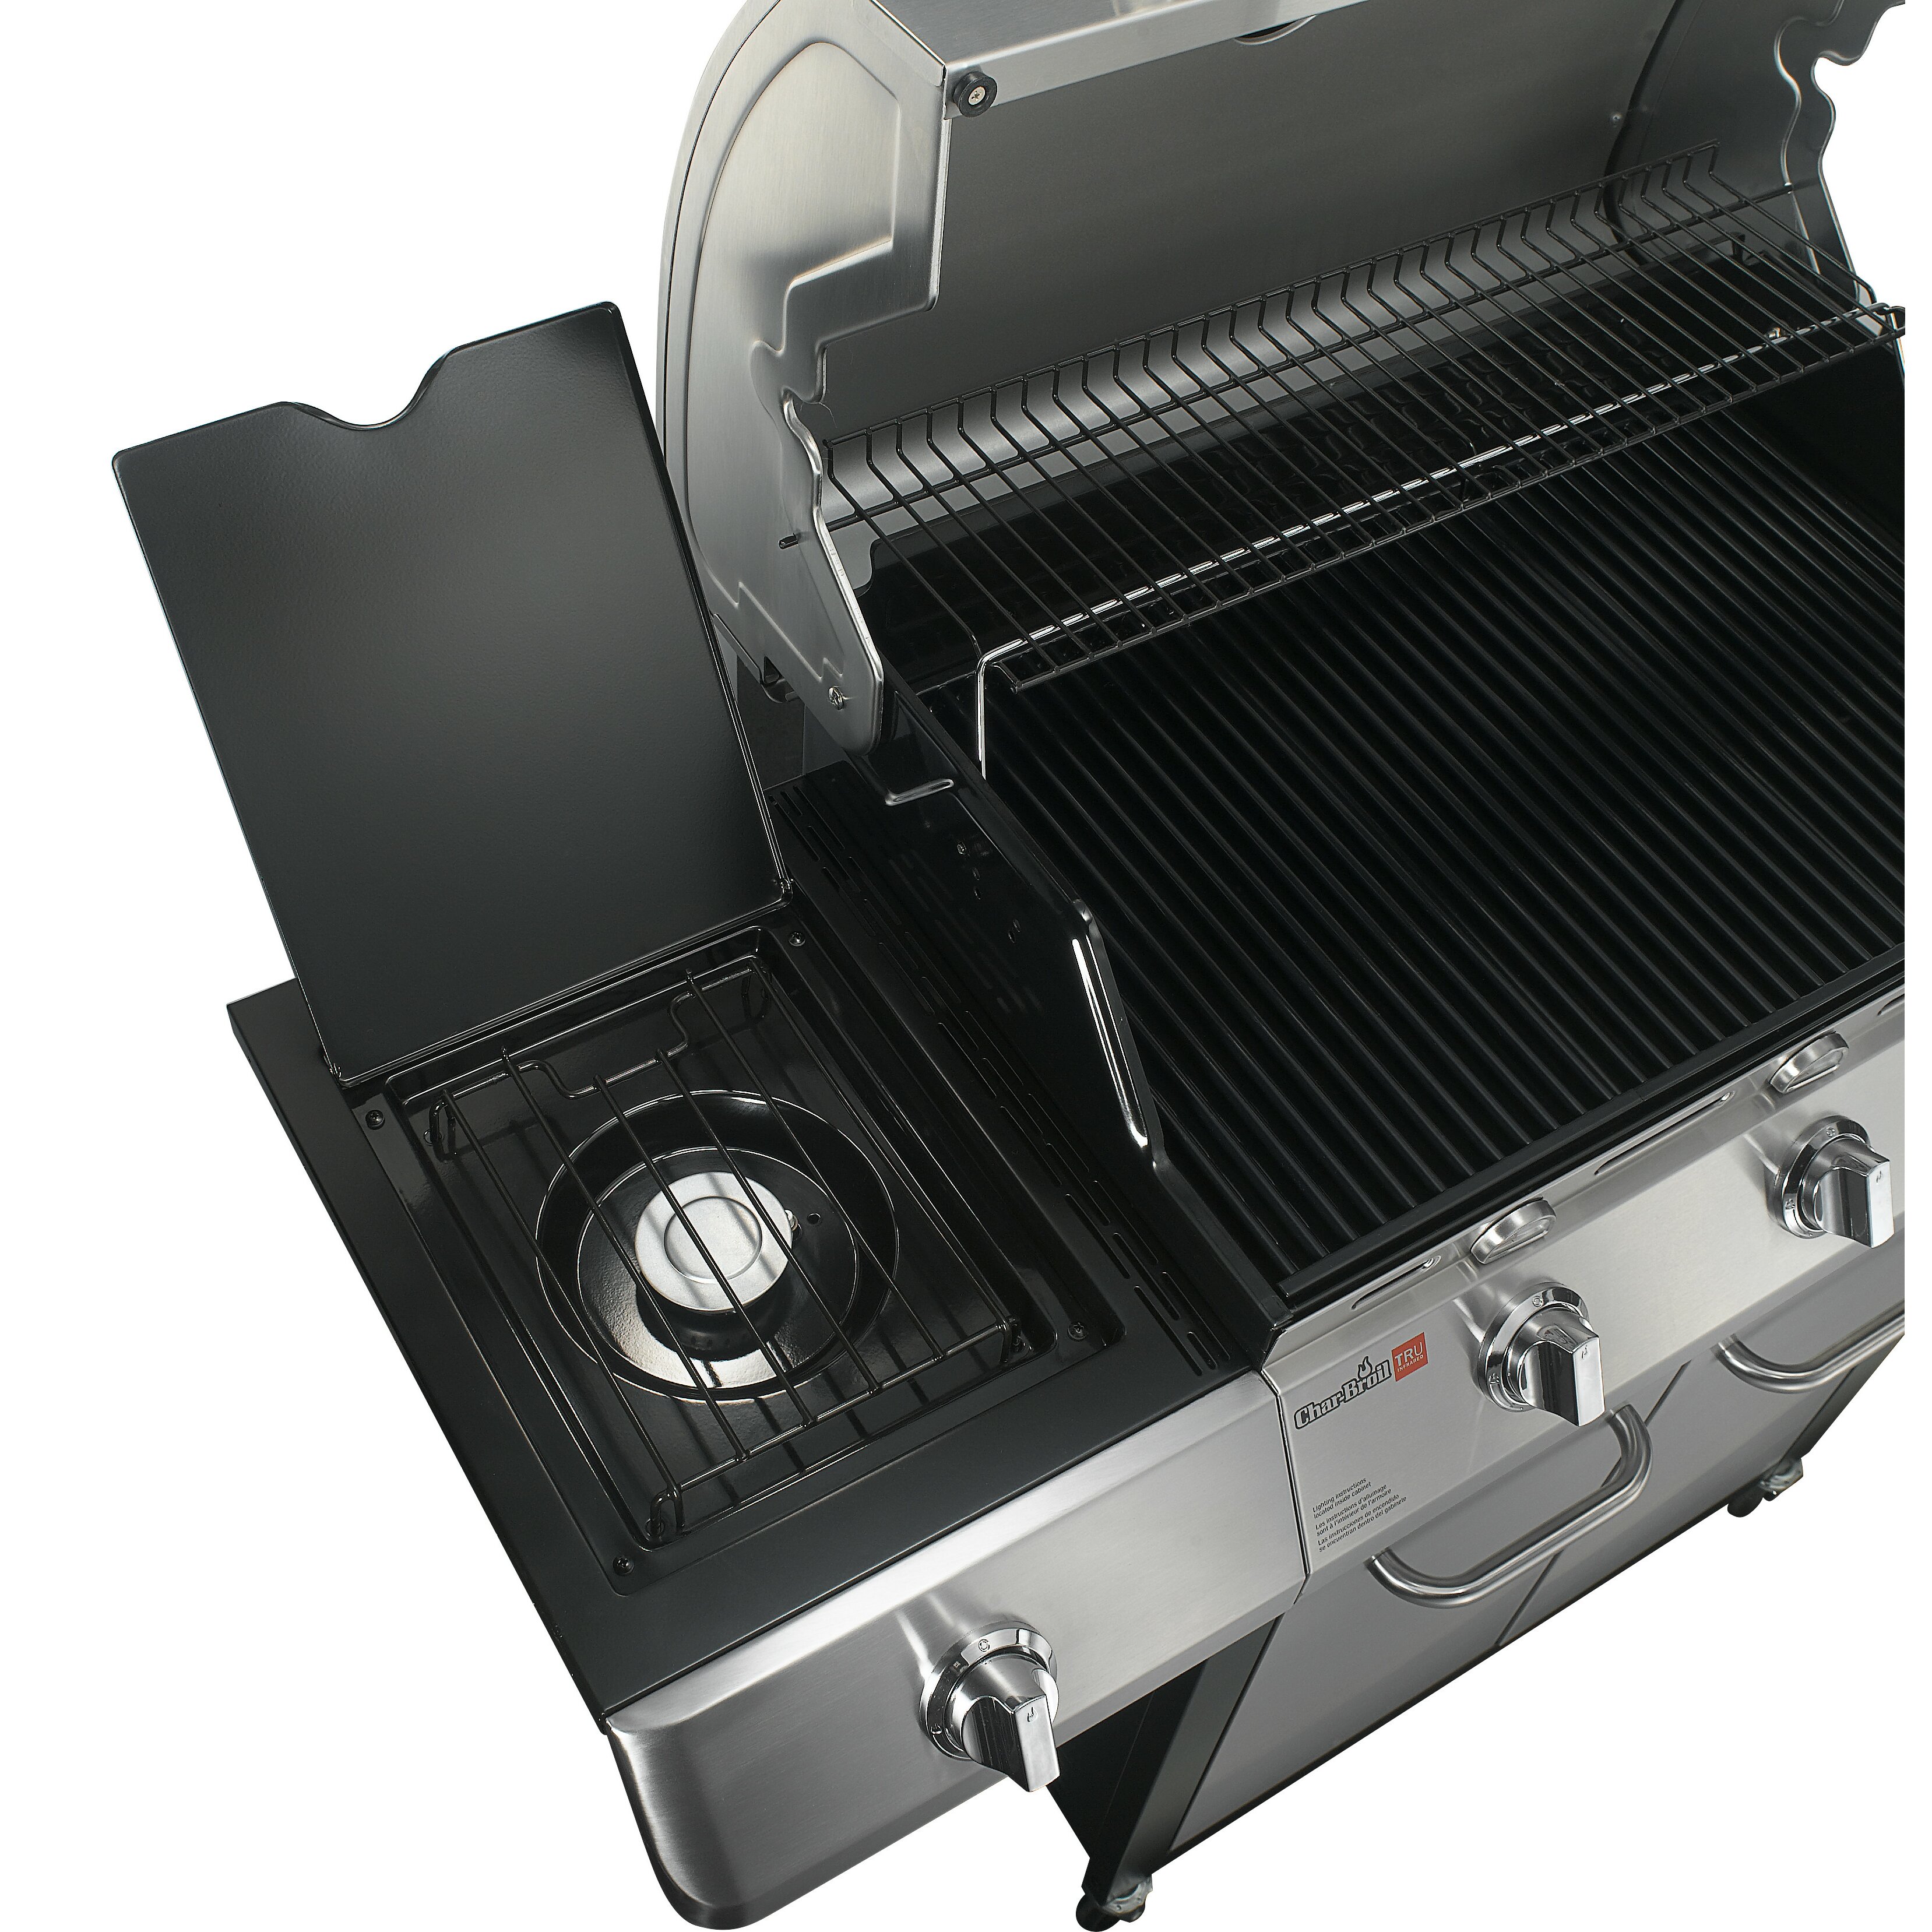 CharBroil TRU Infrared Performance 3 Burner Gas Grill with ...